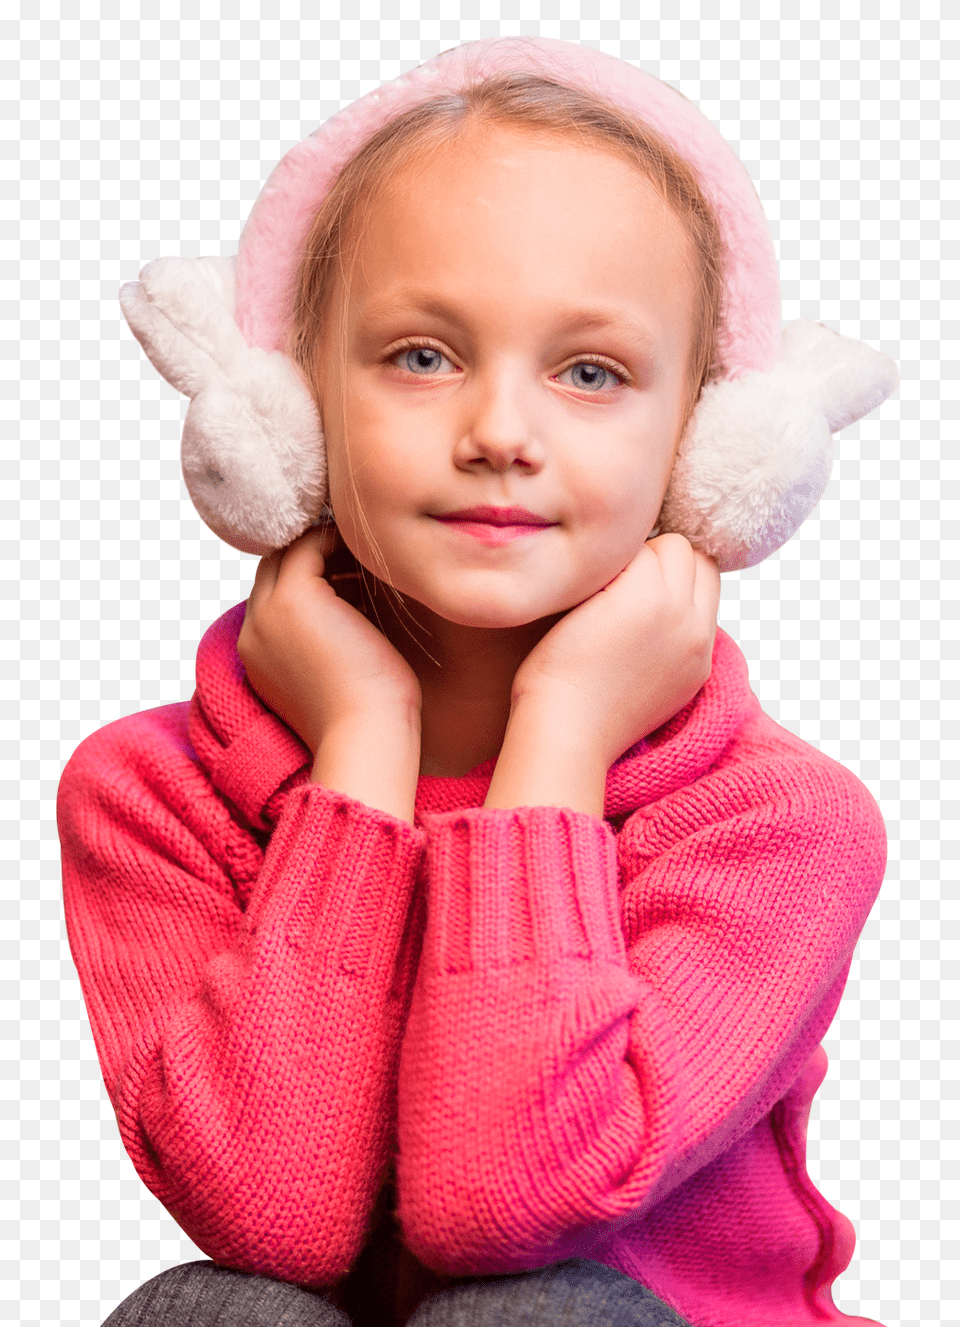 Pngpix Com Young Cute Girl Wearing Warm Clothes Image, Clothing, Hat, Sweater, Knitwear Png